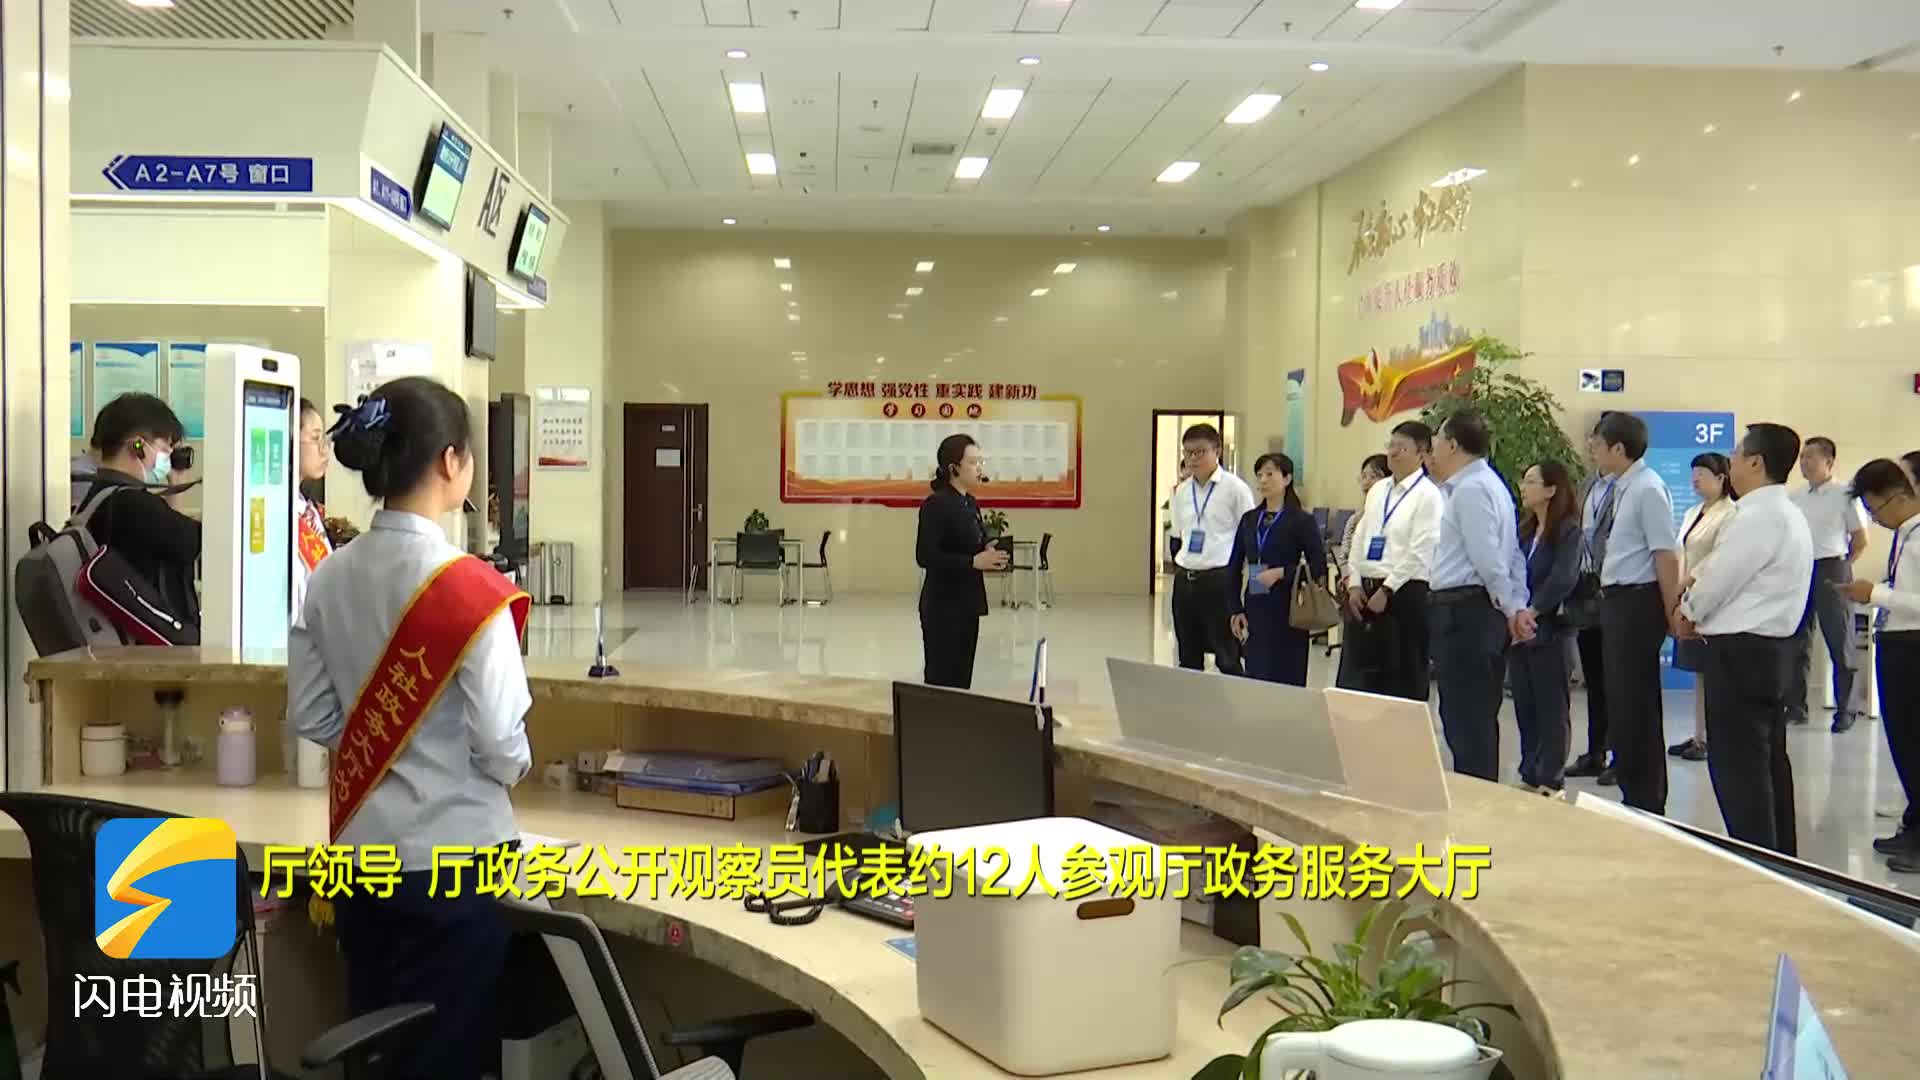  The Department of Human Resources and Social Security of Shandong Province today held the "Government Open Day" activity of key public commitments and the appointment ceremony of government affairs public observers